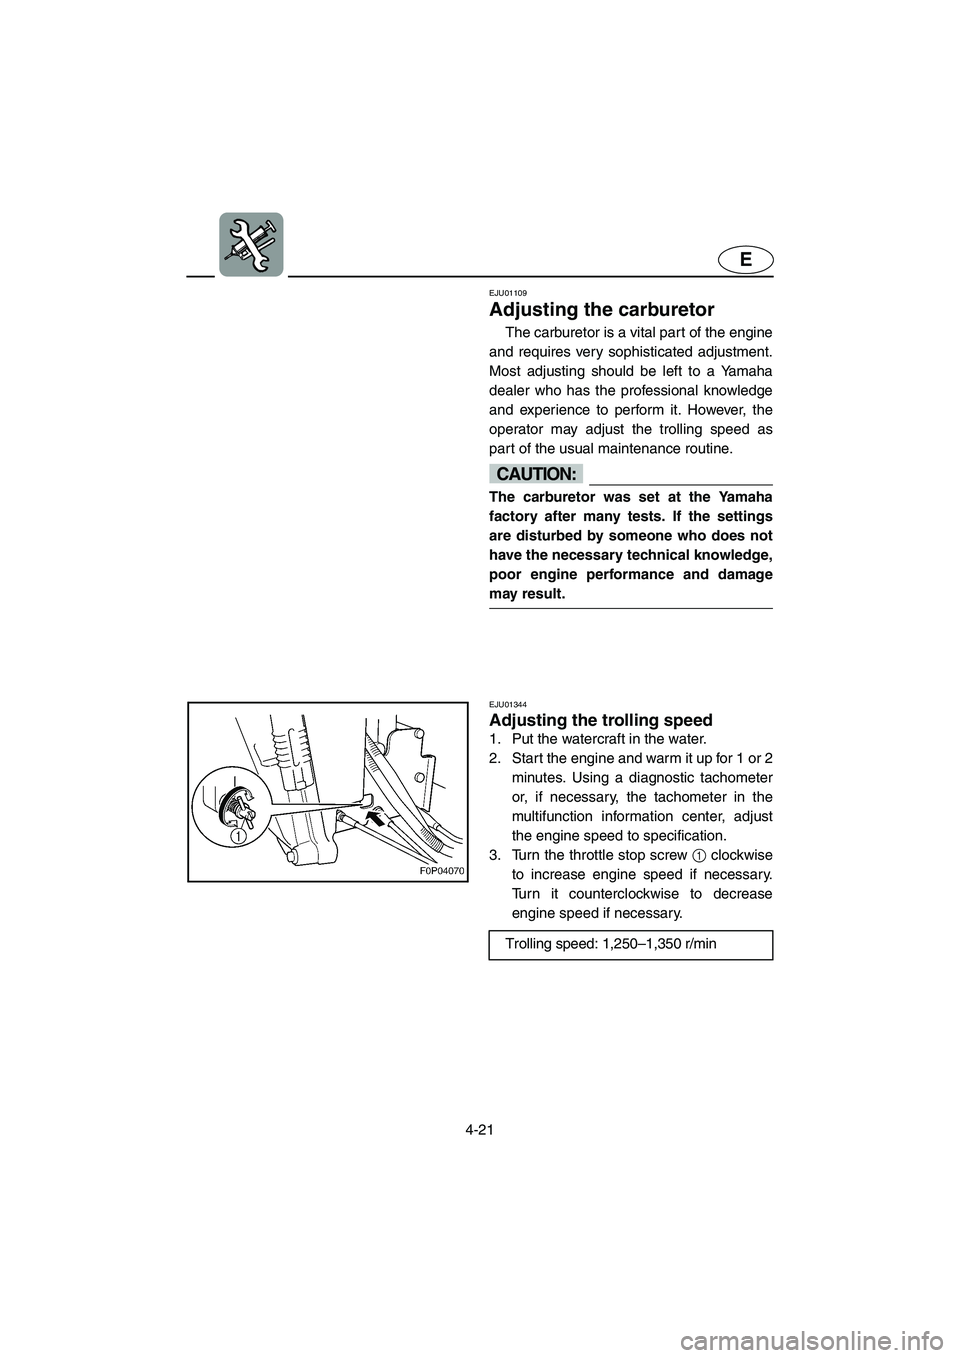 YAMAHA GP800R 2002 User Guide 4-21
E
EJU01109 
Adjusting the carburetor  
The carburetor is a vital part of the engine
and requires very sophisticated adjustment.
Most adjusting should be left to a Yamaha
dealer who has the profes